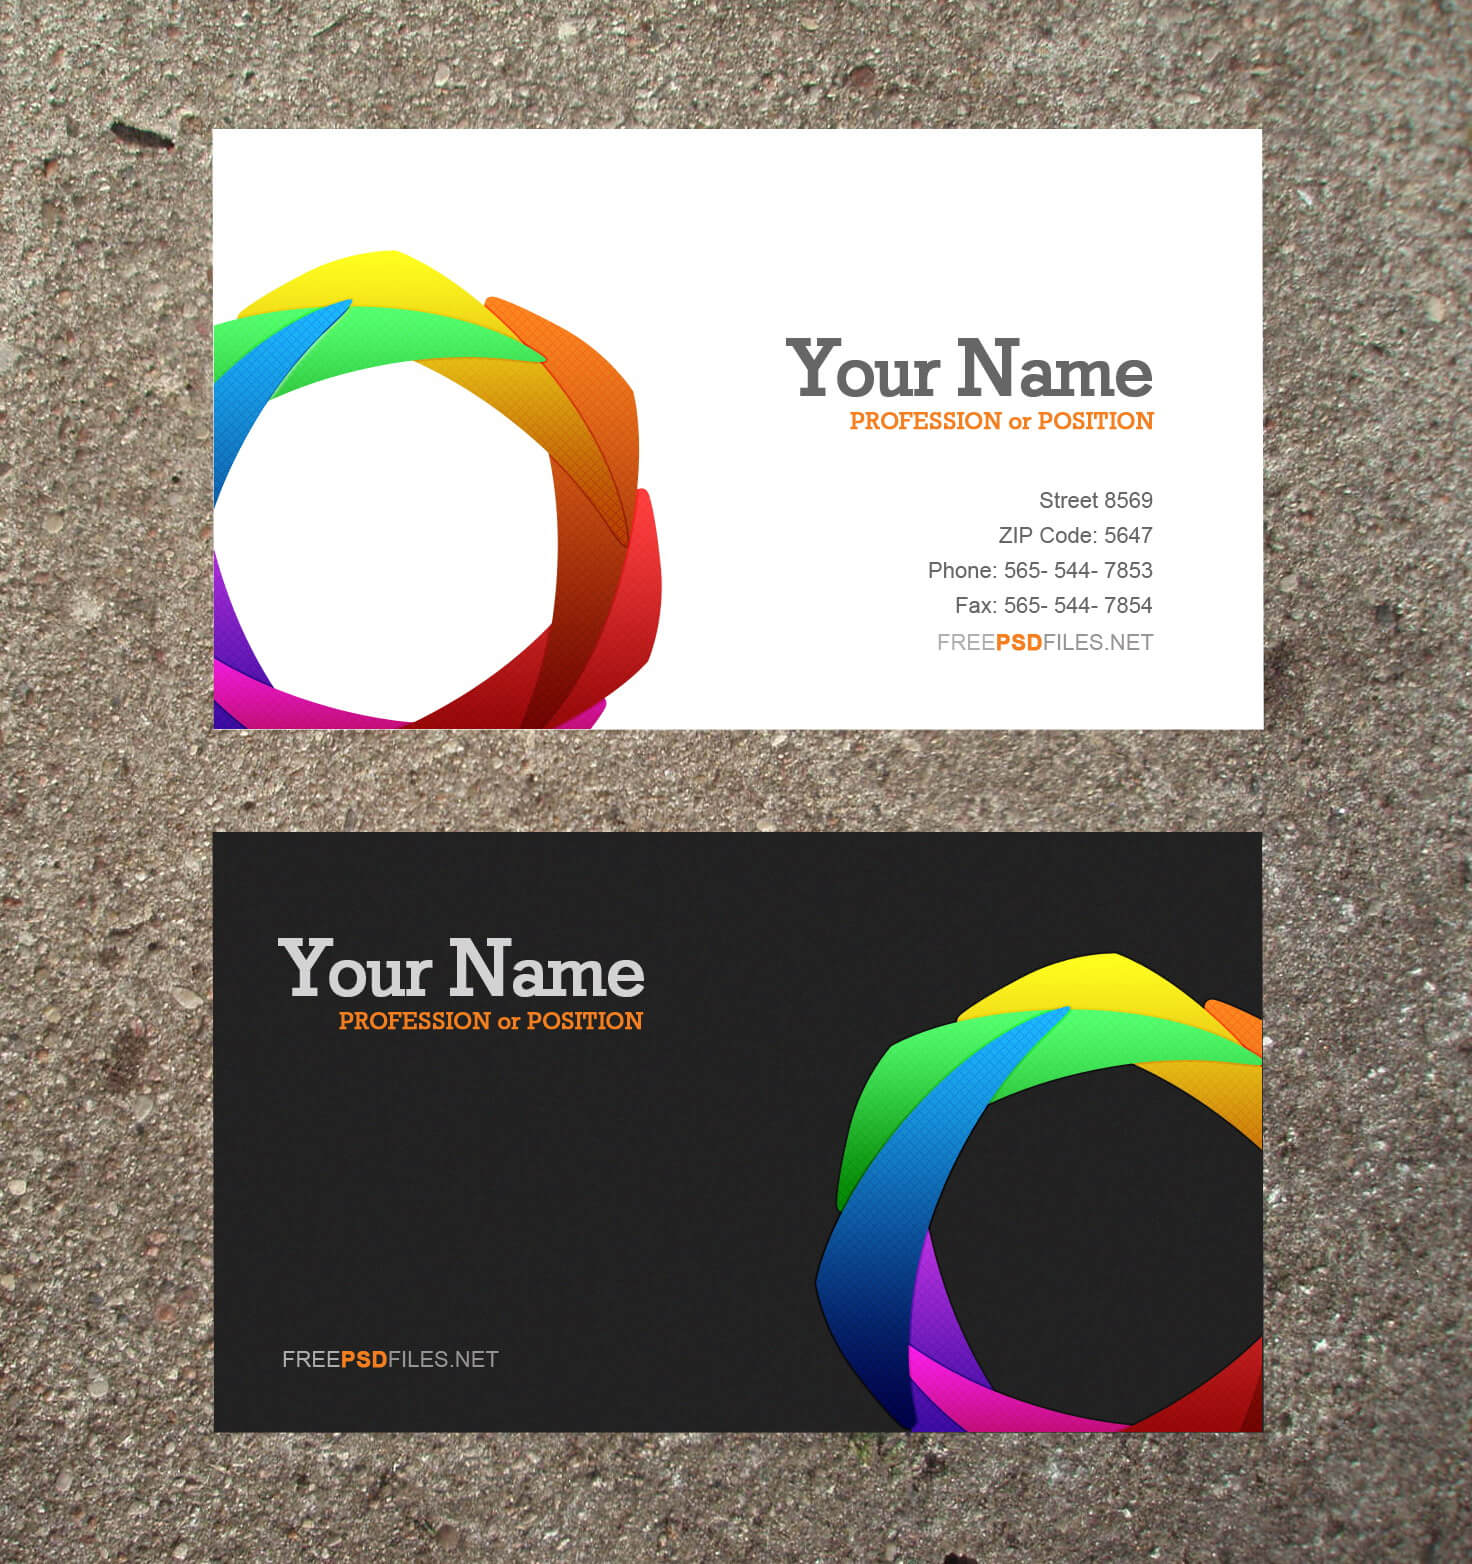 Free Business Cards Design Your Own And Print – Yeppe Throughout Blank Business Card Template Download